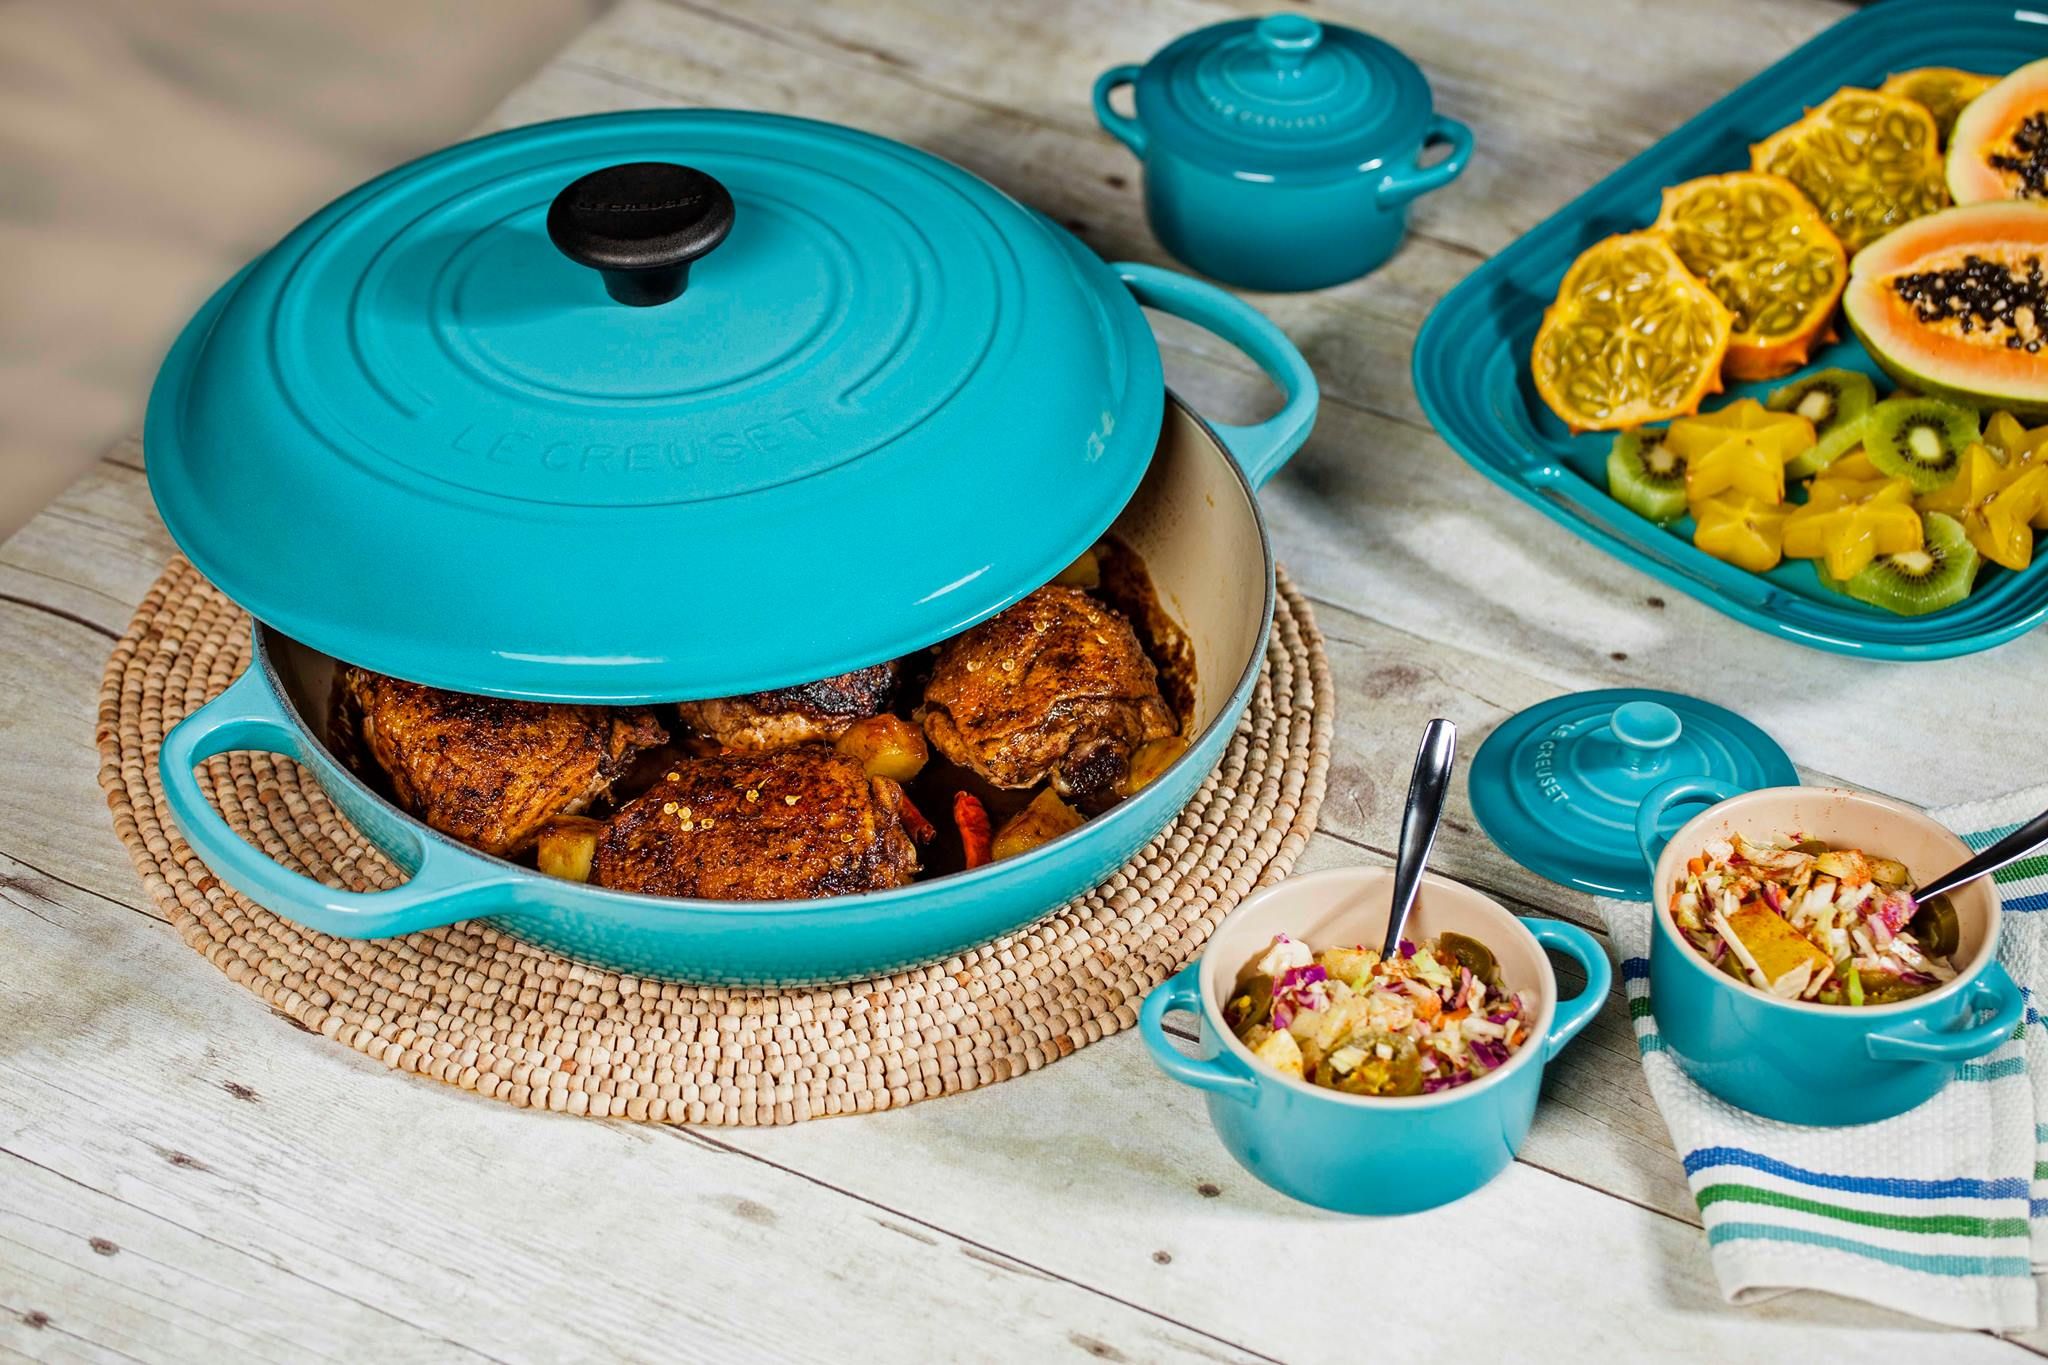 8 things you didn't know about Le Creuset - Good Housekeeping